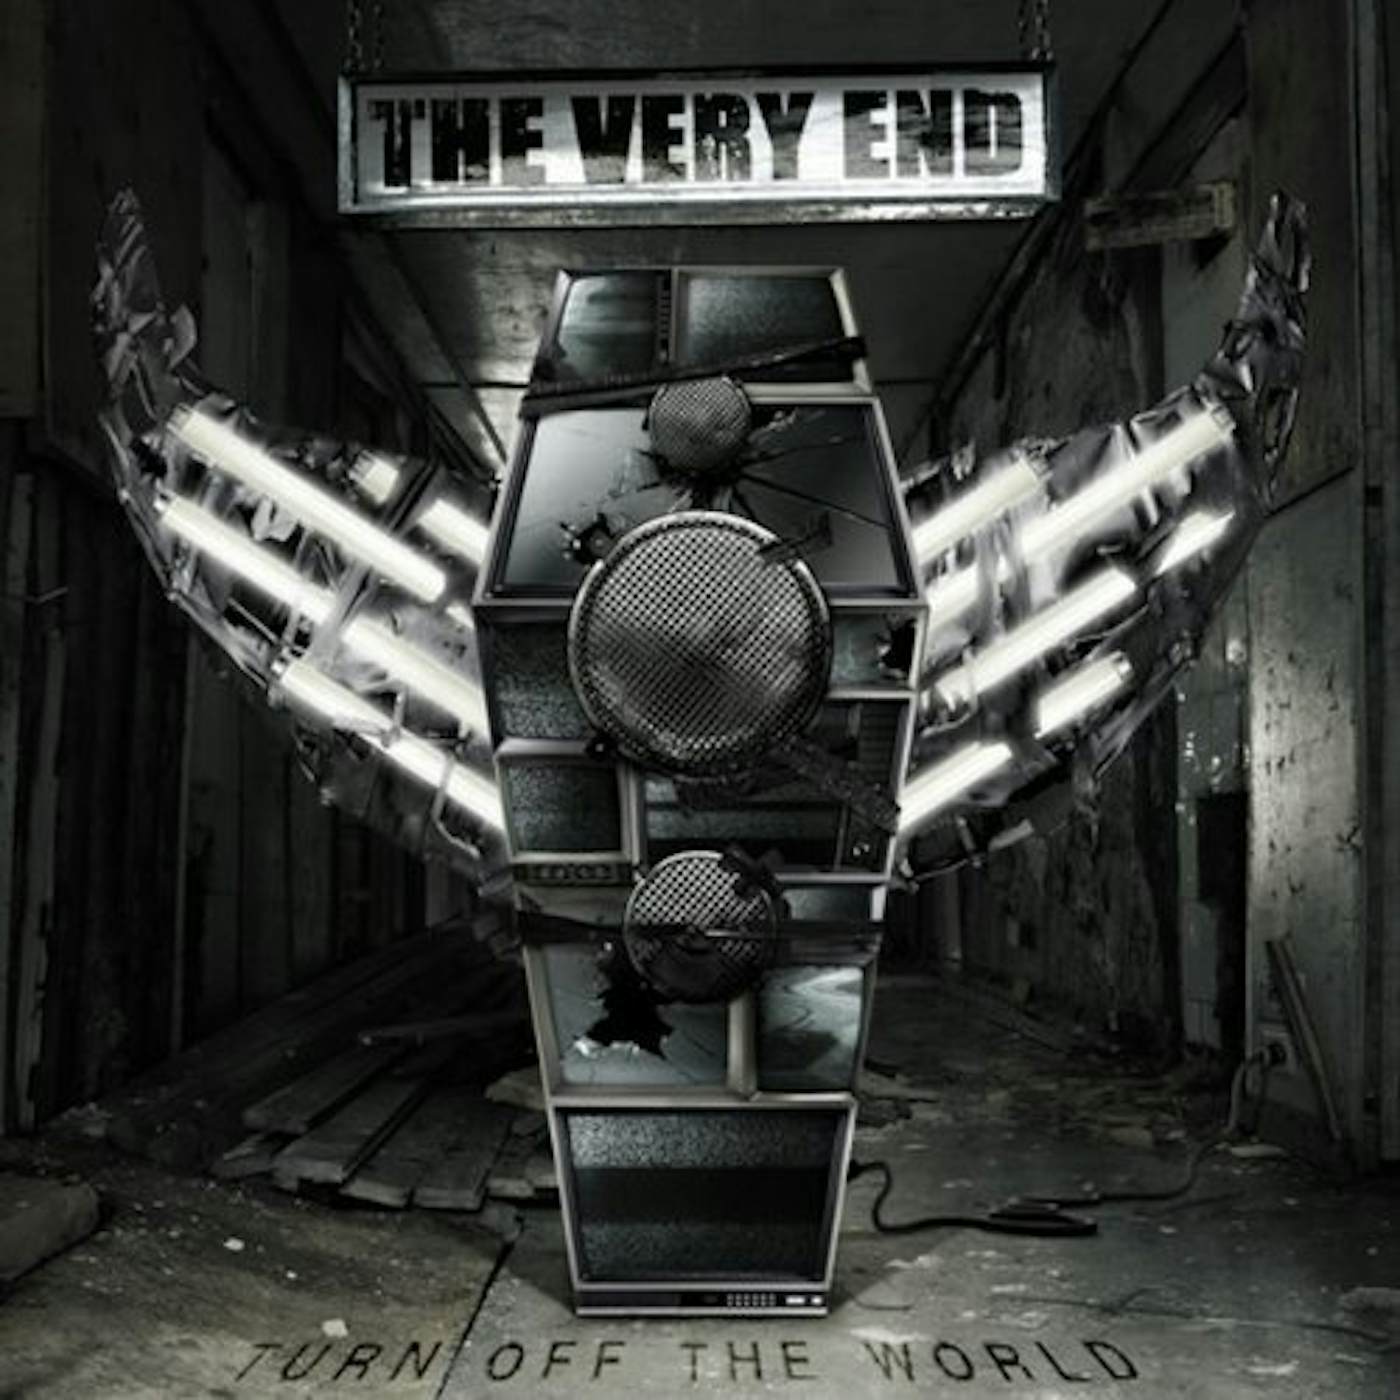 The Very End TURN OFF THE WORLD CD